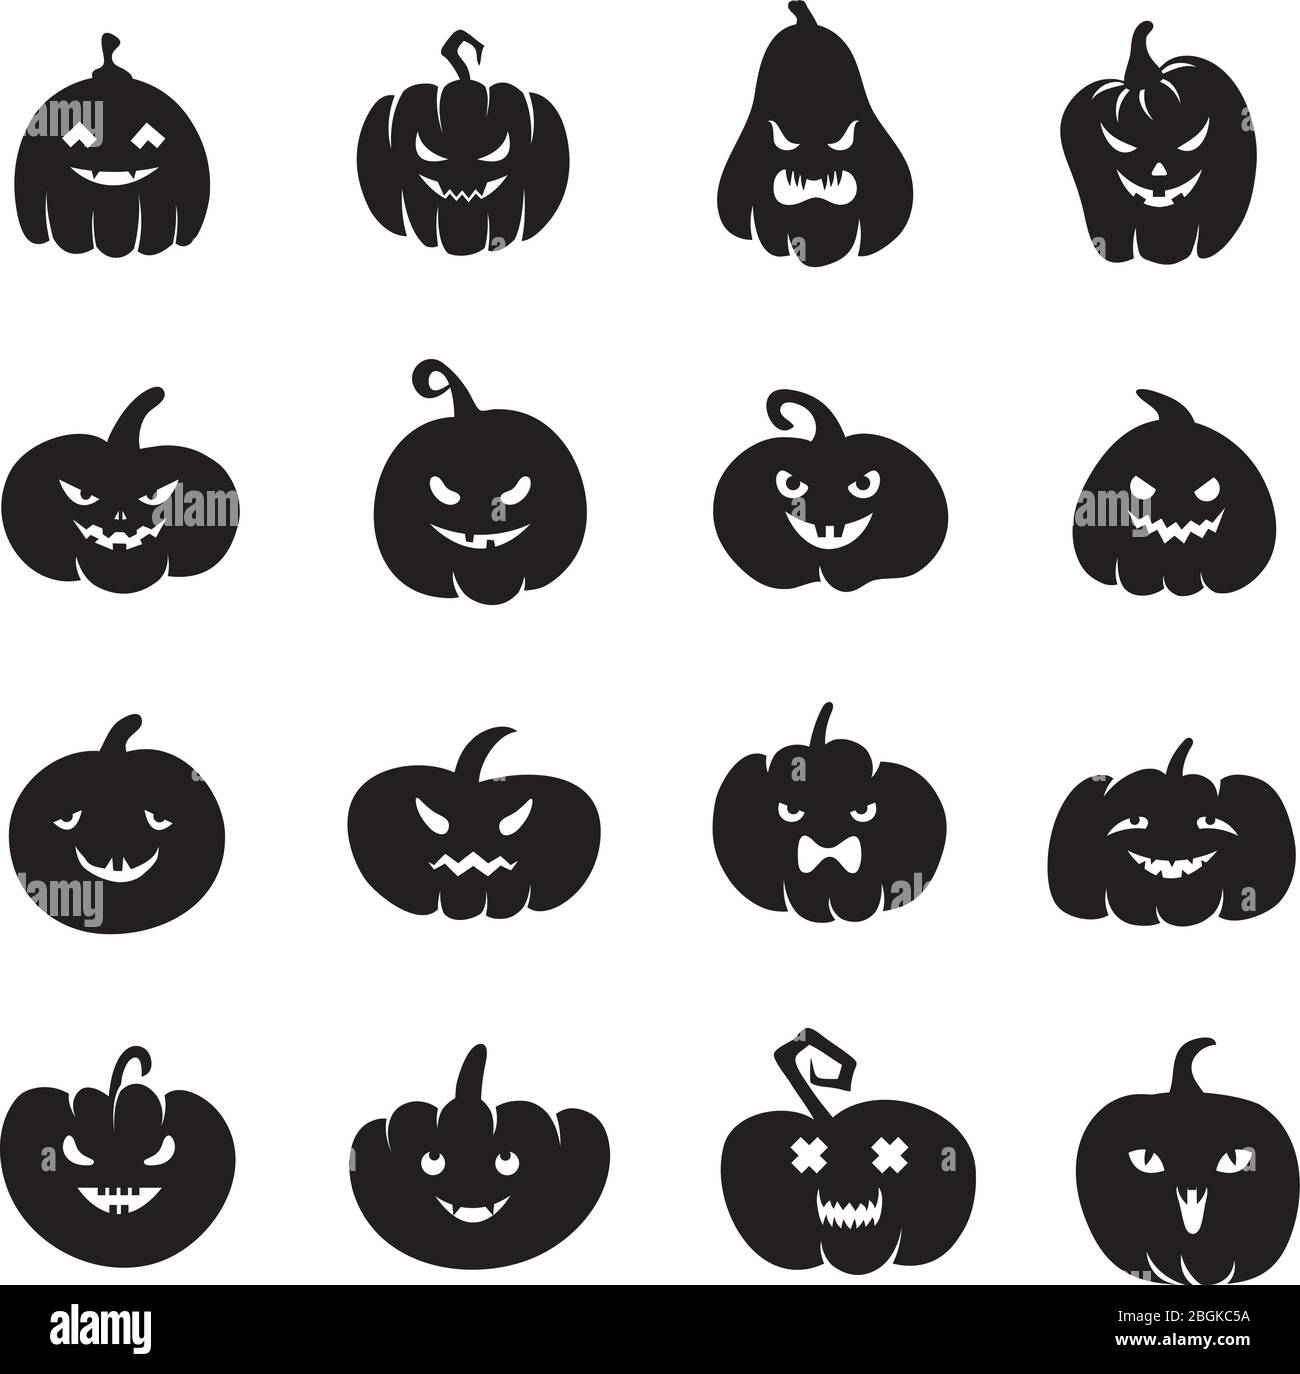 Halloween pumpkin faces. Scary pumpkins bloody with evil smile and eyes. Pumpkin black silhouette to halloween holiday illustration Stock Vector